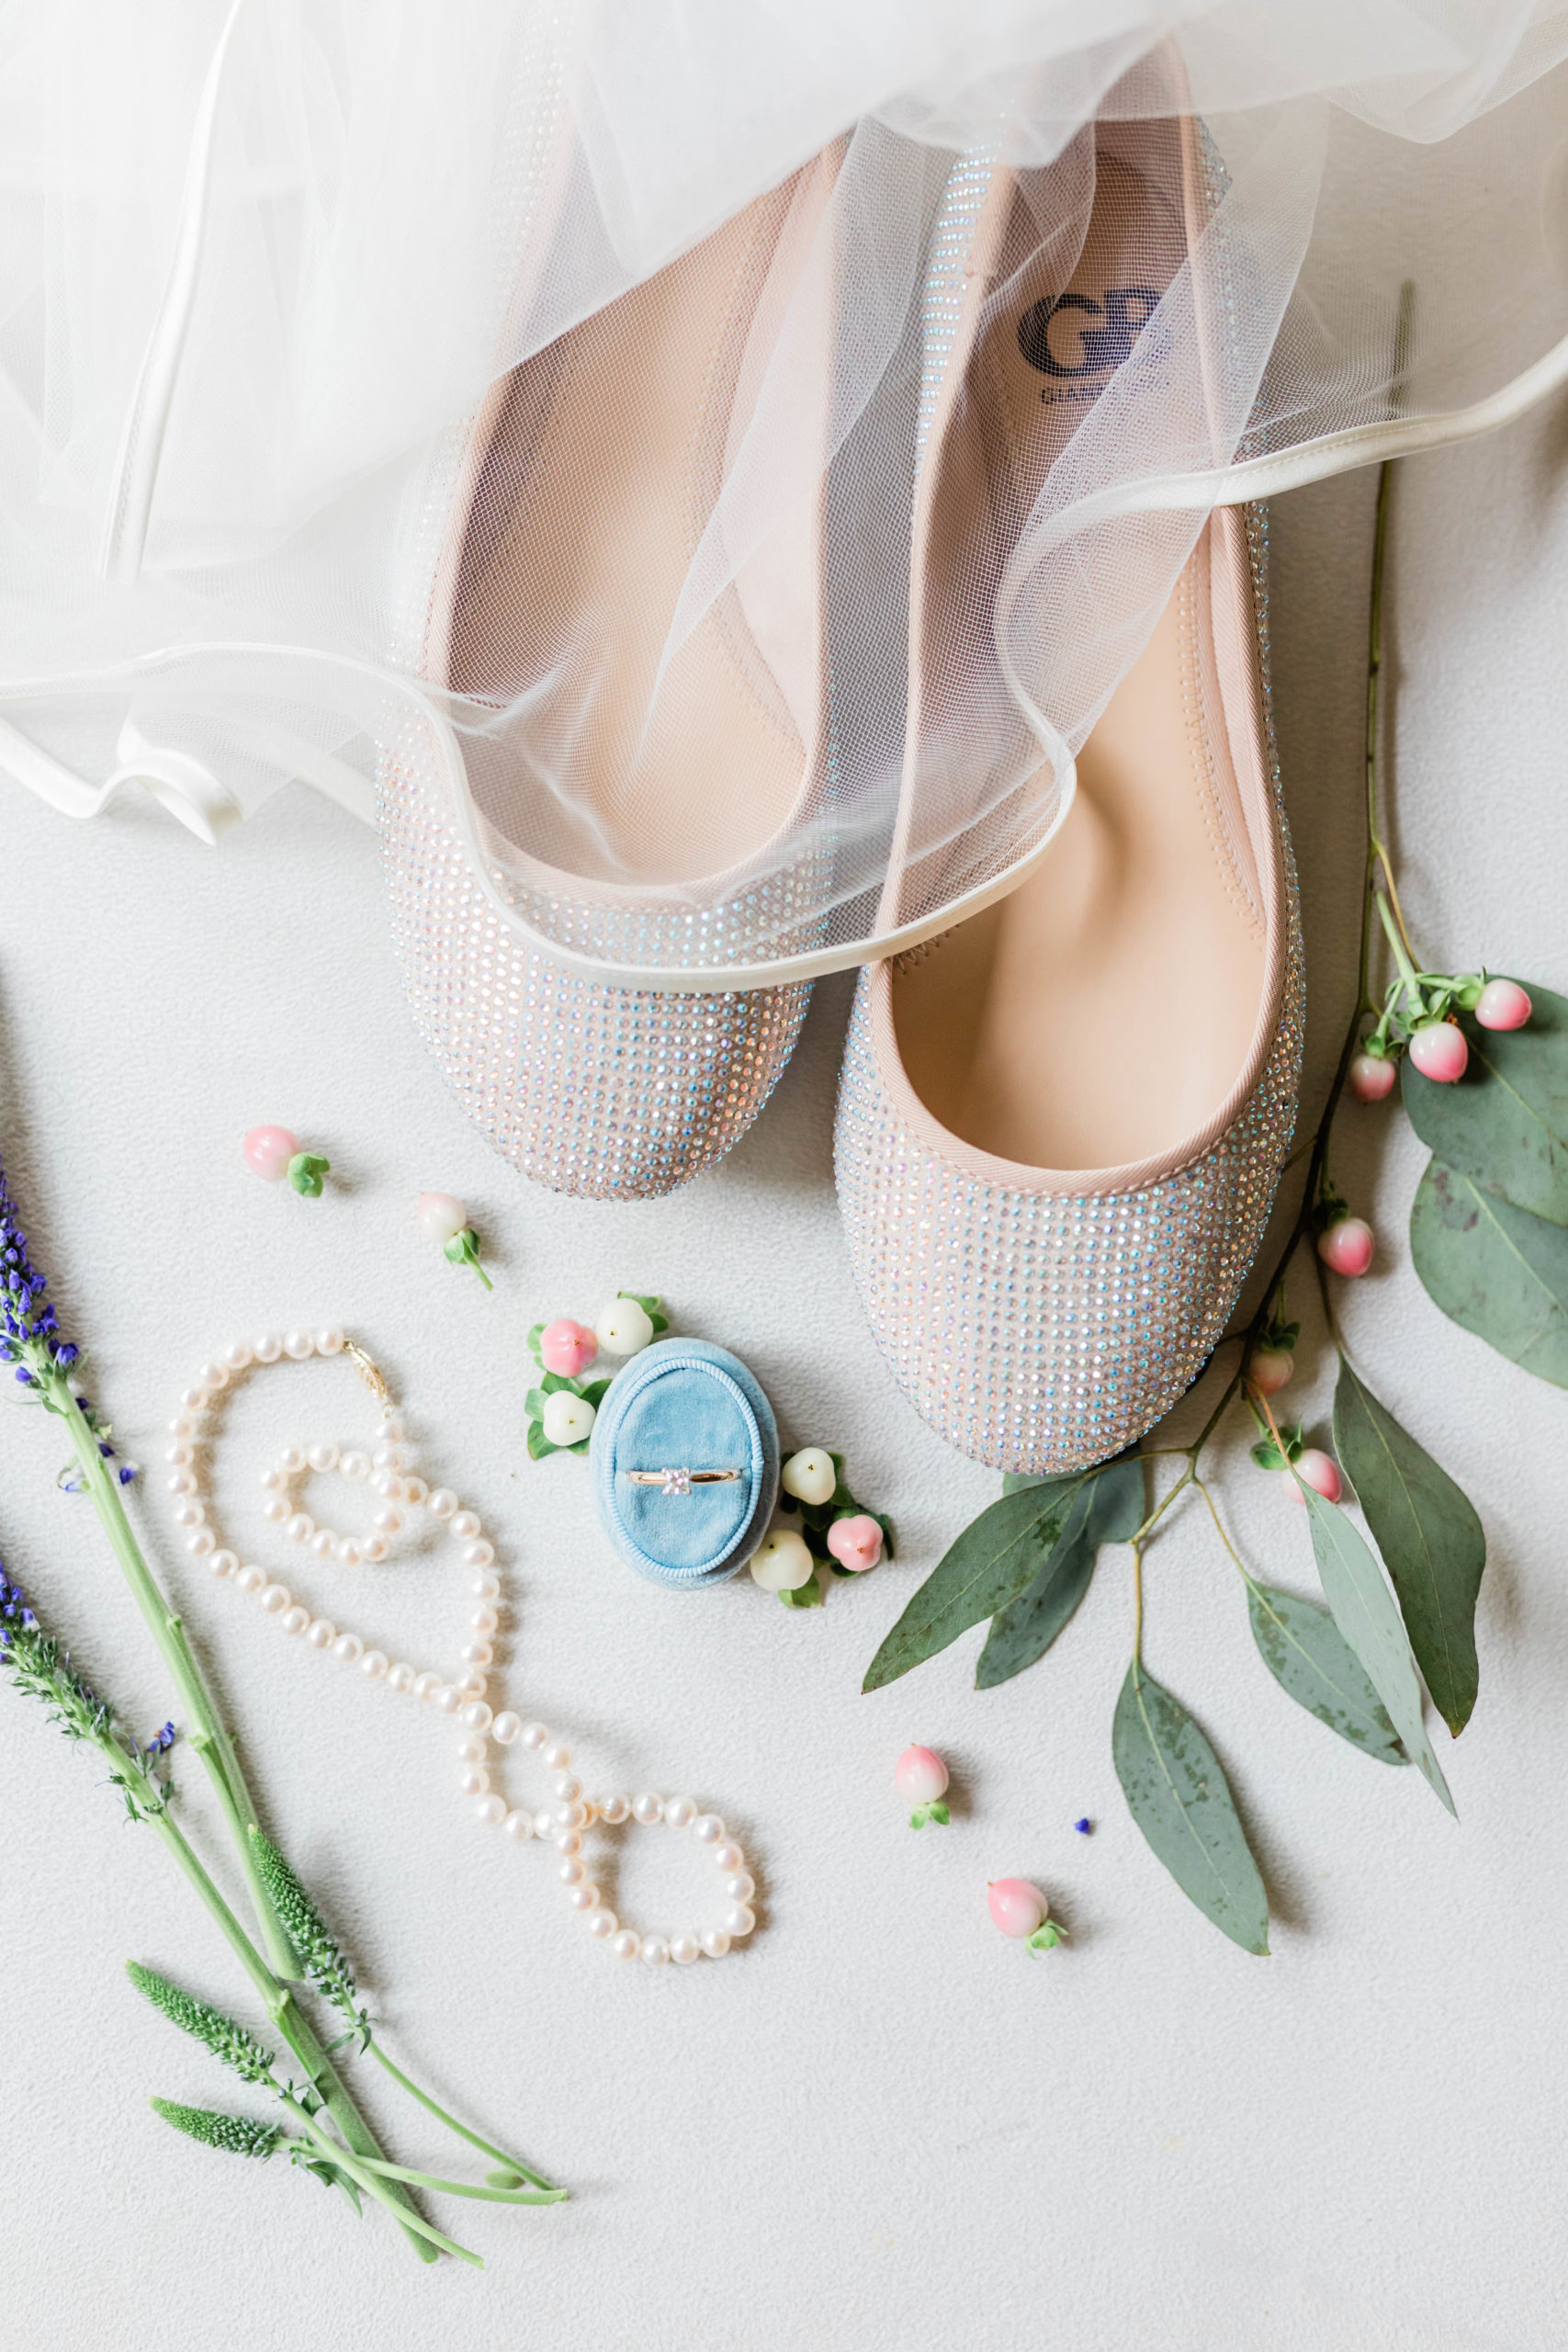 bridal details with greenery, jewelry and shoes